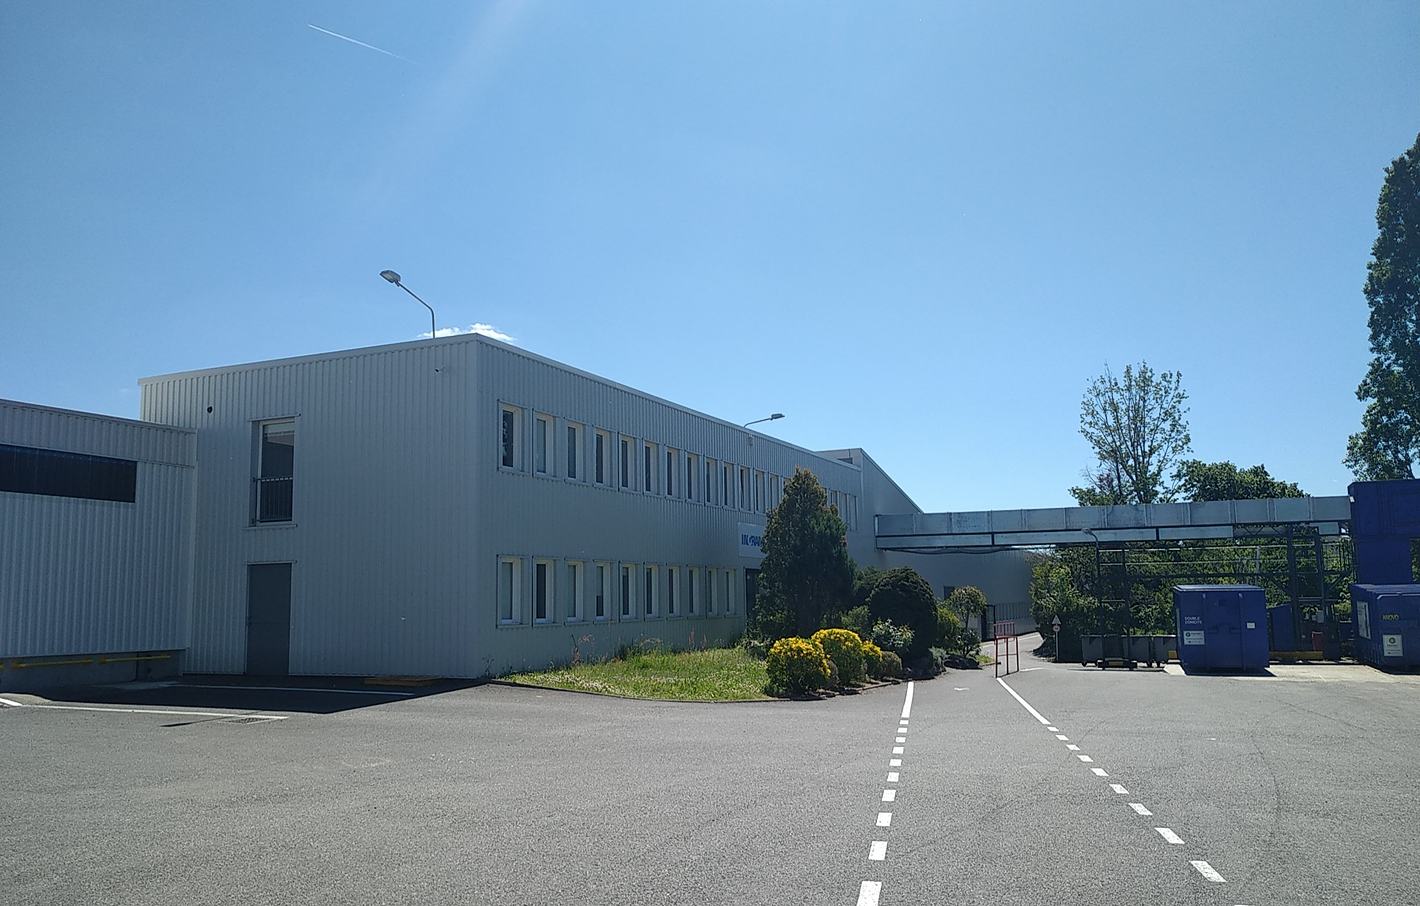 Ingram Micro Lifecycle facility in Montauban, France